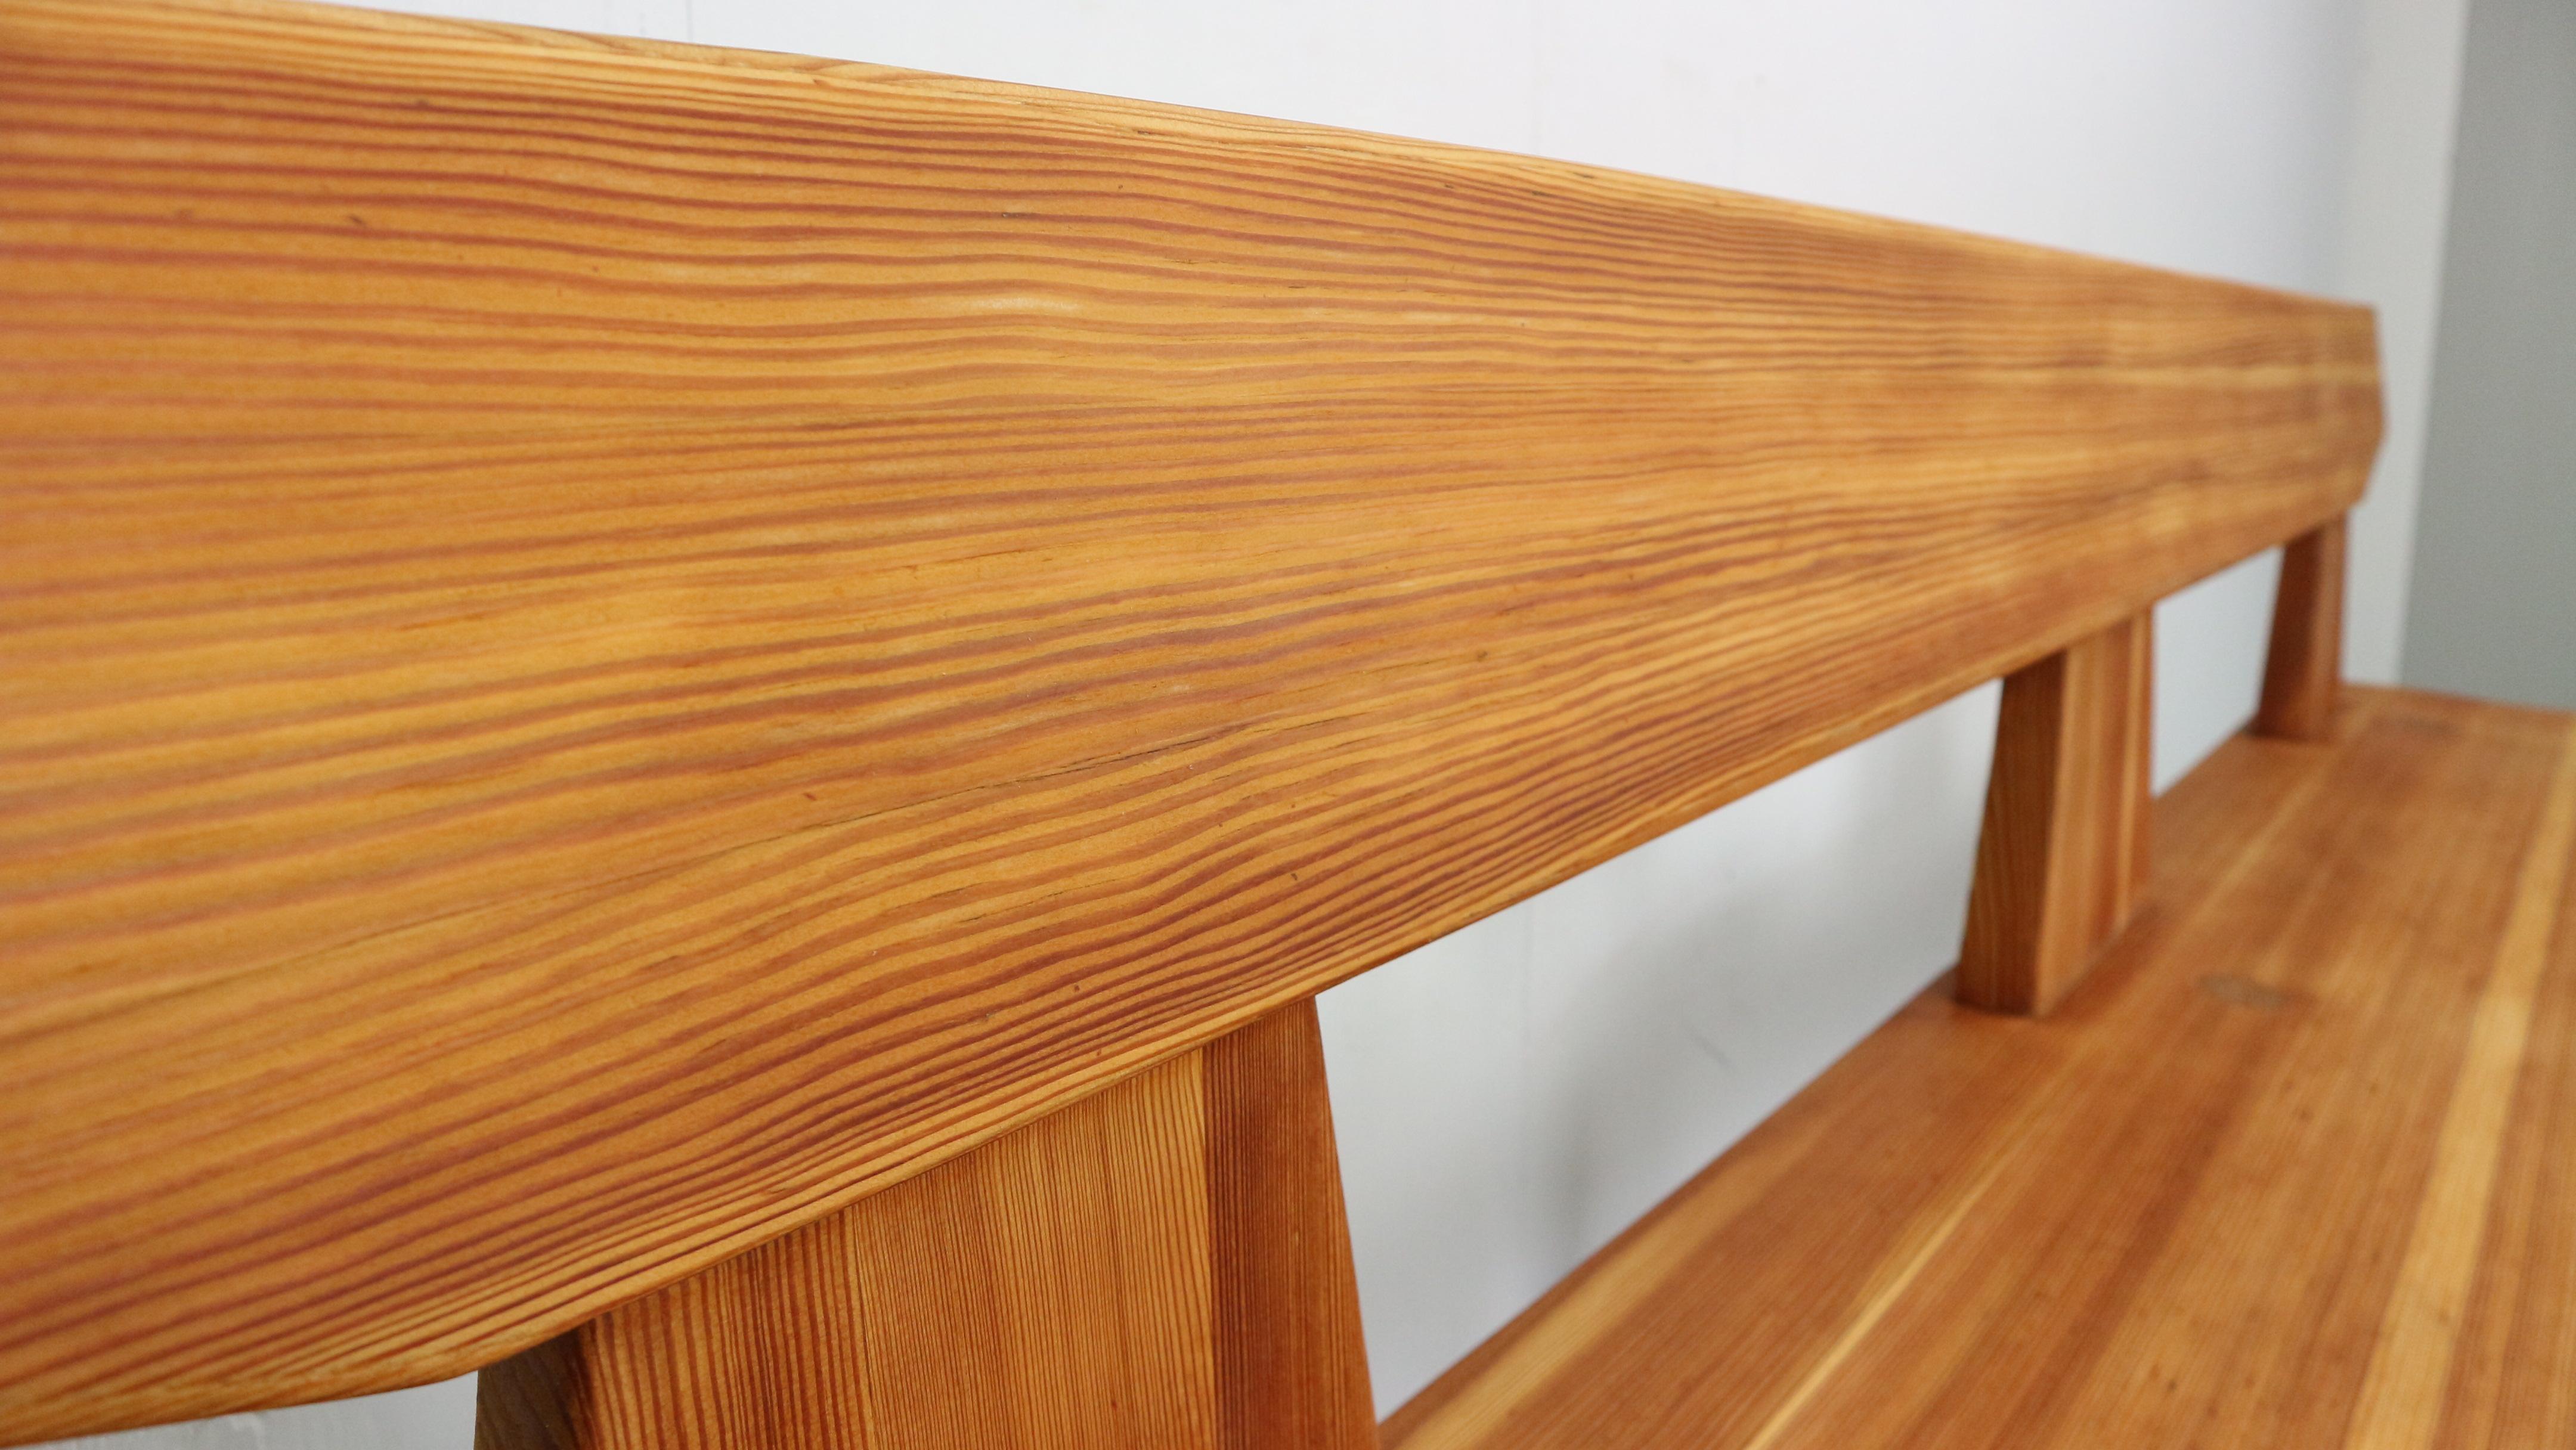 Jacob Kielland Brandt Bench in Pine Wood for Christiansen, Handcrafted, 1960s For Sale 4